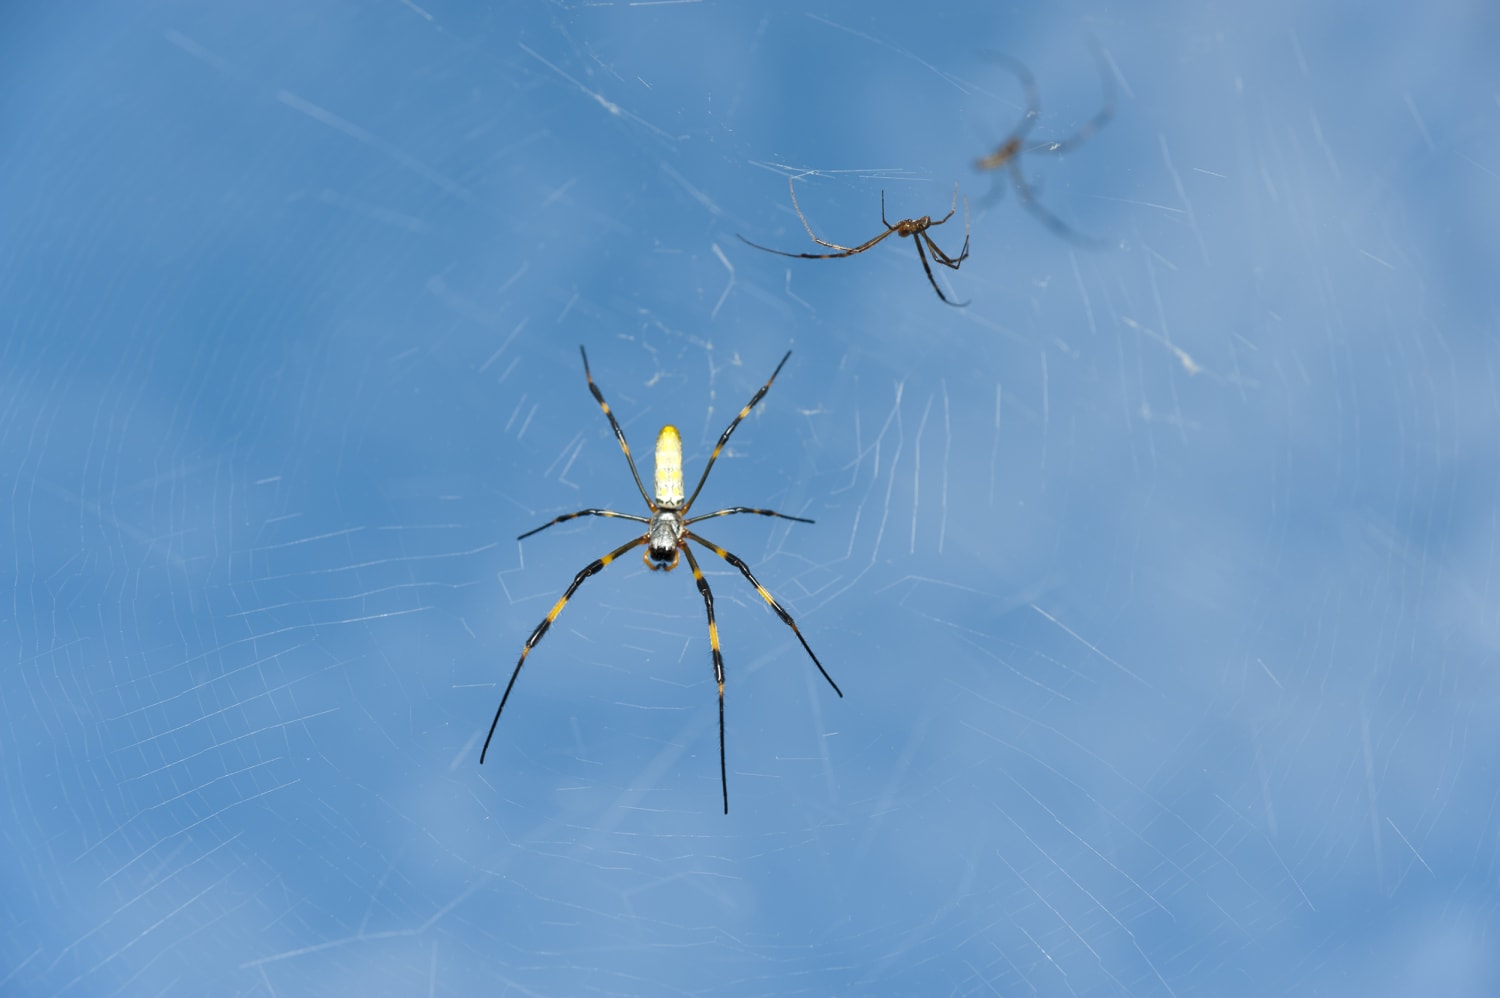 Millions of Palm-Sized Flying Spiders Could Invade the East Coast